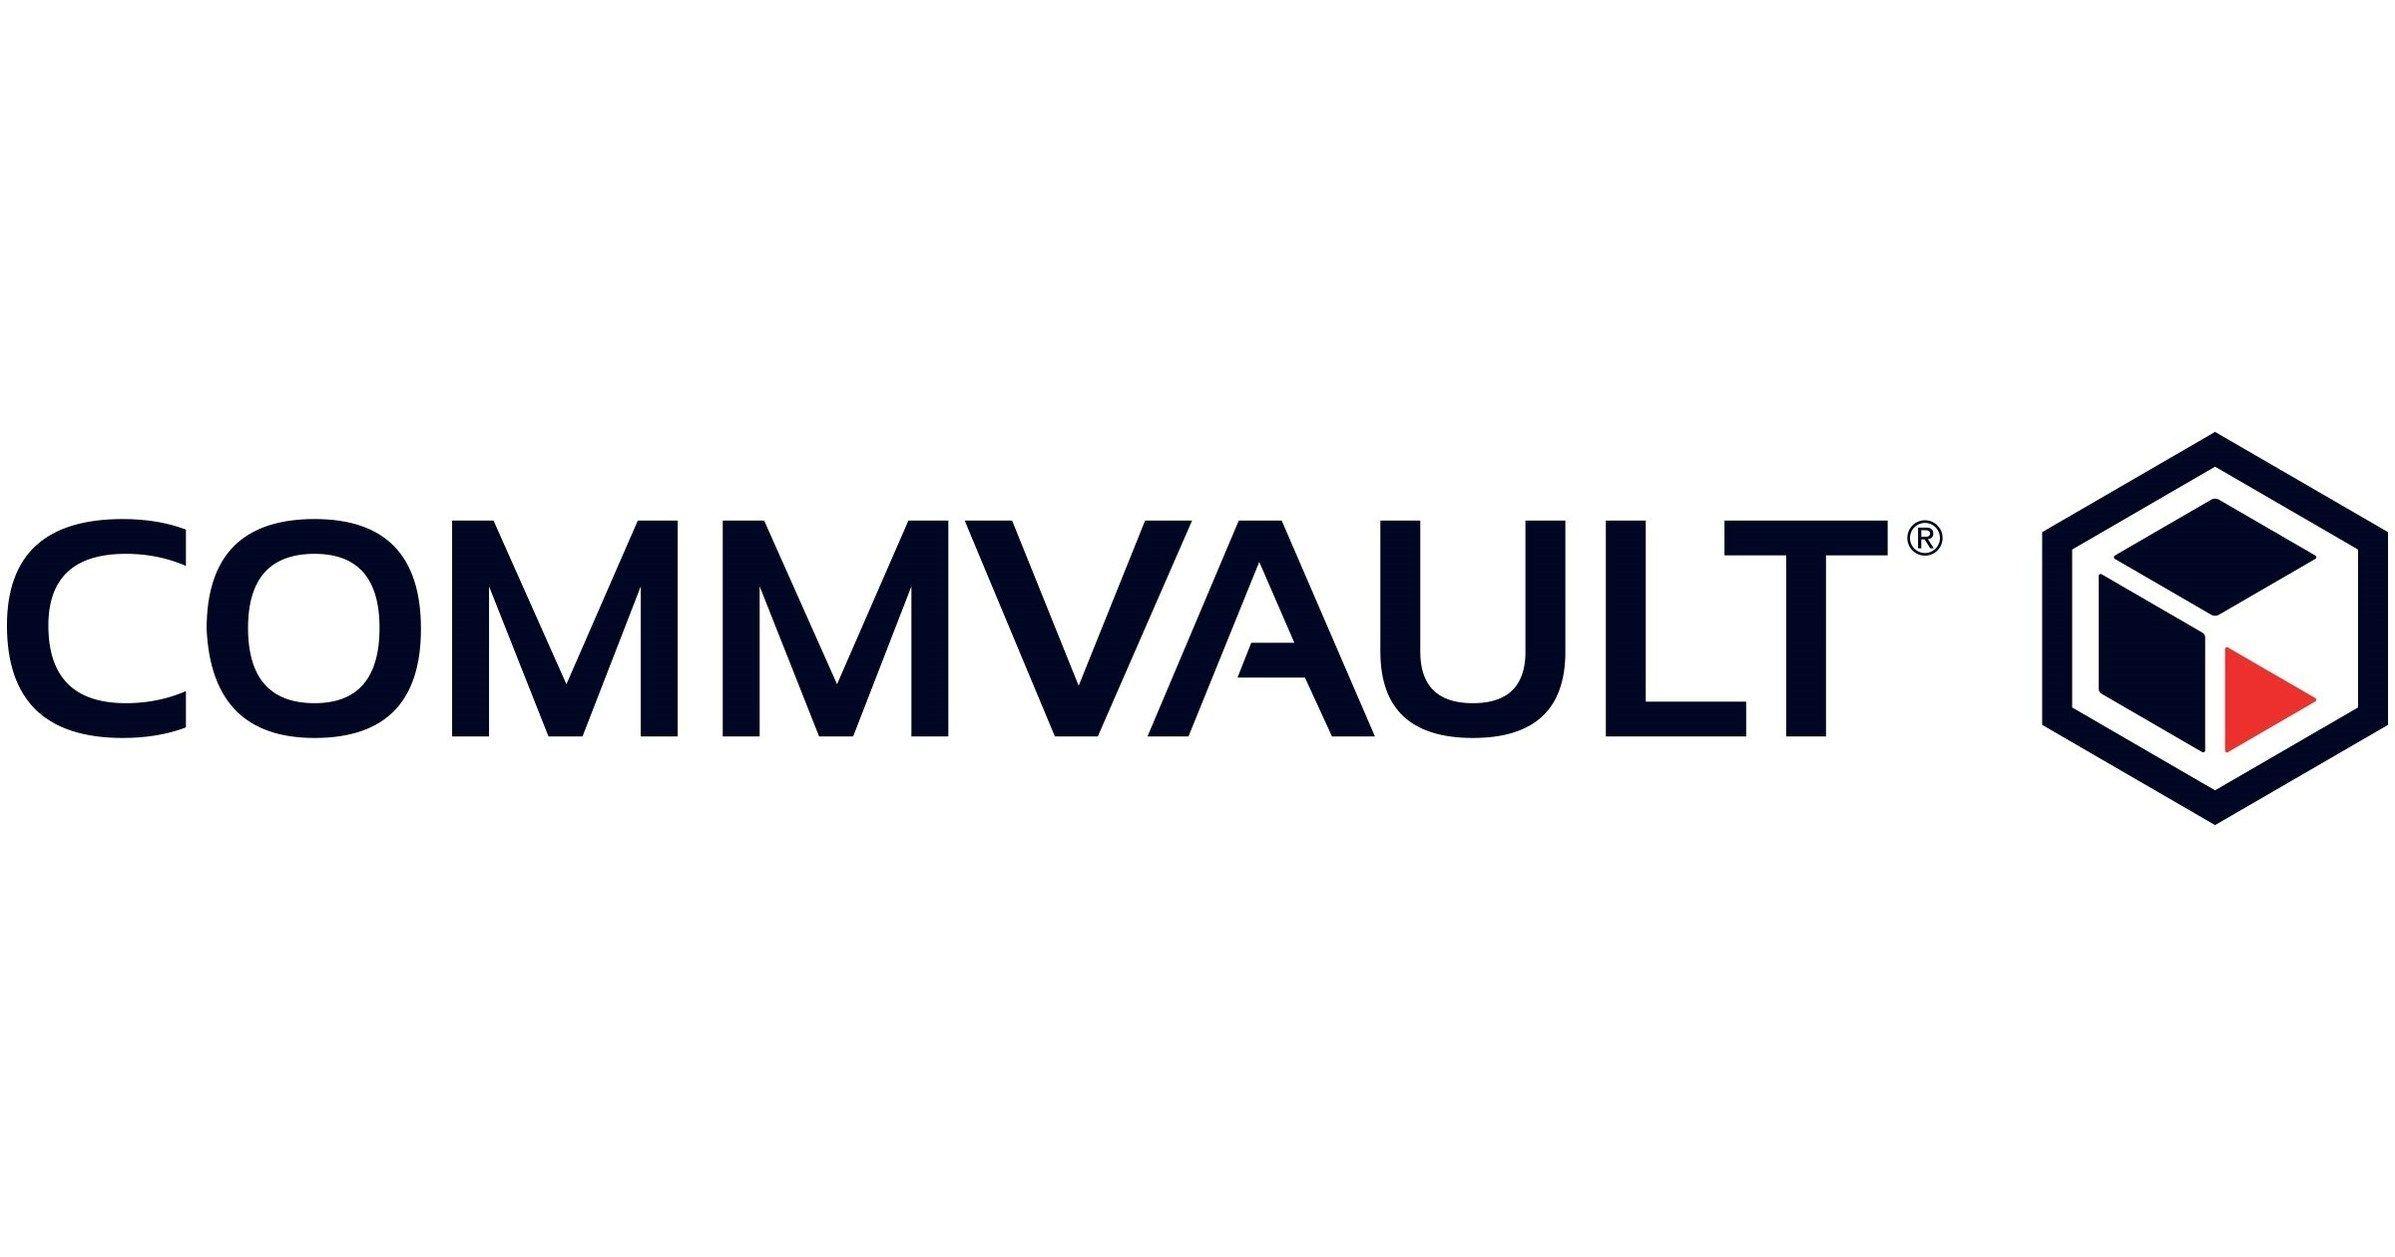 CommVault Logo - Singer's Nomination For Commvault Systems' Board